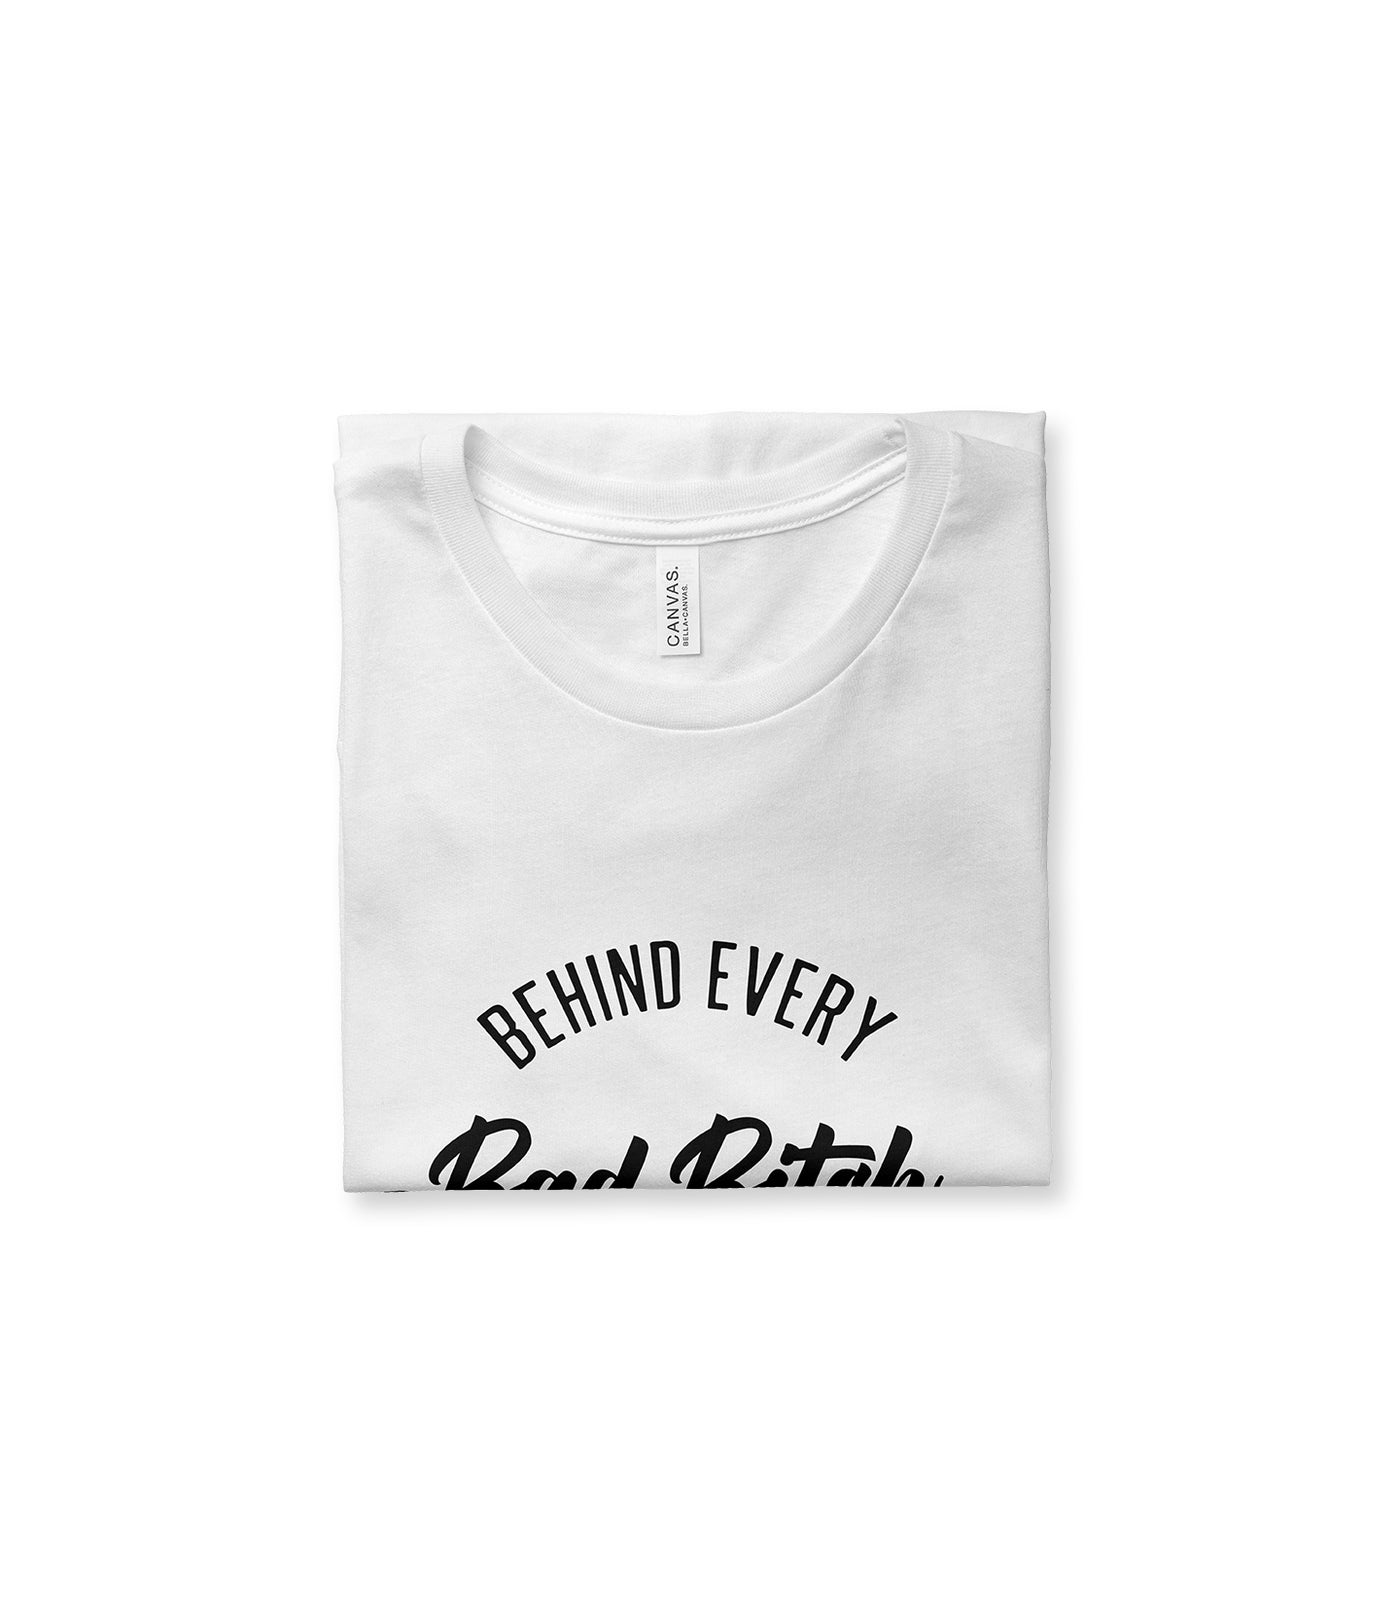 Behind Every Bad Bitch is a Car Seat Tee